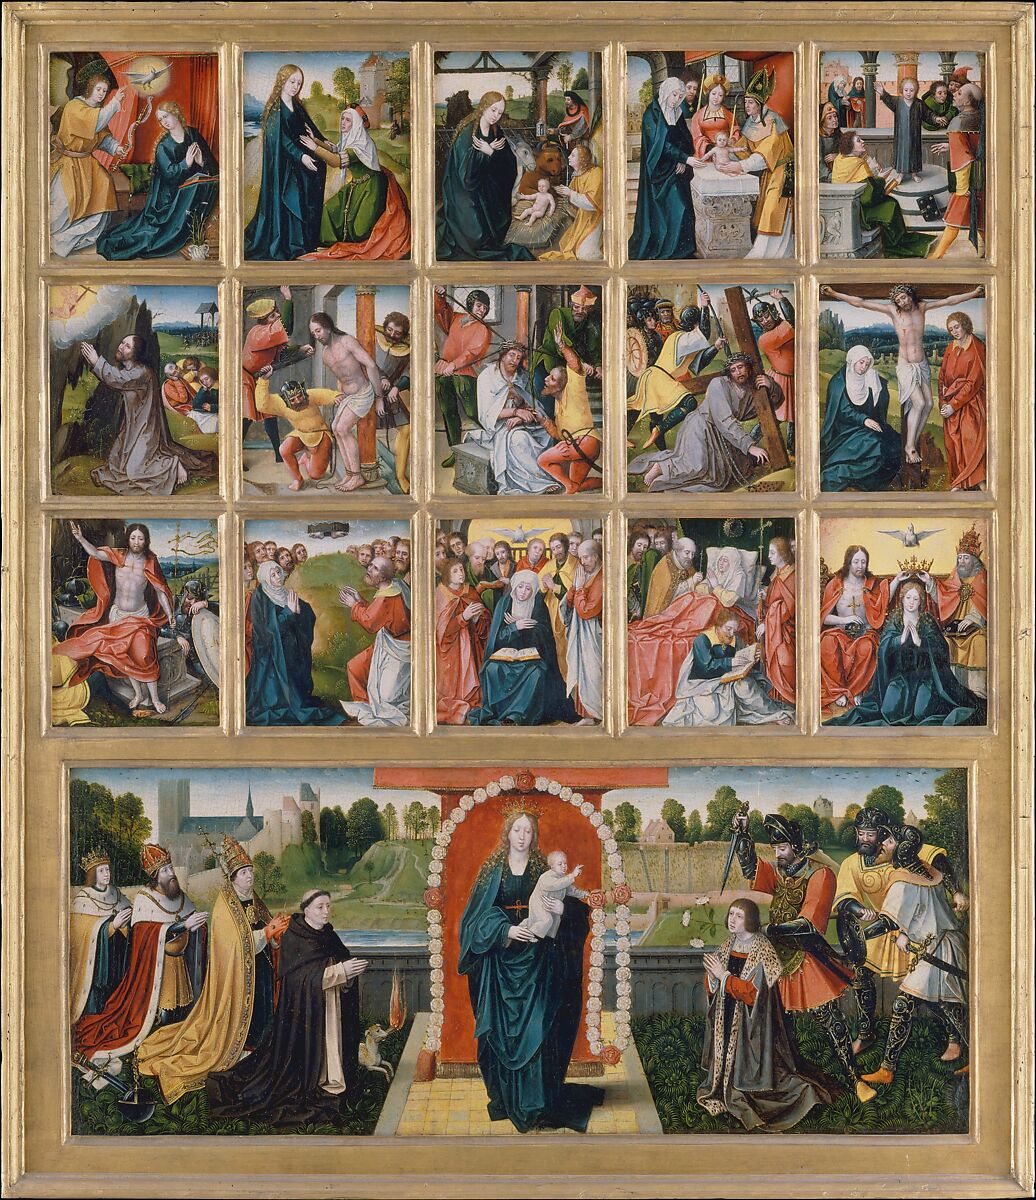 The Fifteen Mysteries and the Virgin of the Rosary, Netherlandish Painter (possibly Goswijn van der Weyden, active by 1491, died after 1538), ca. 1515–20, Oil on wood 